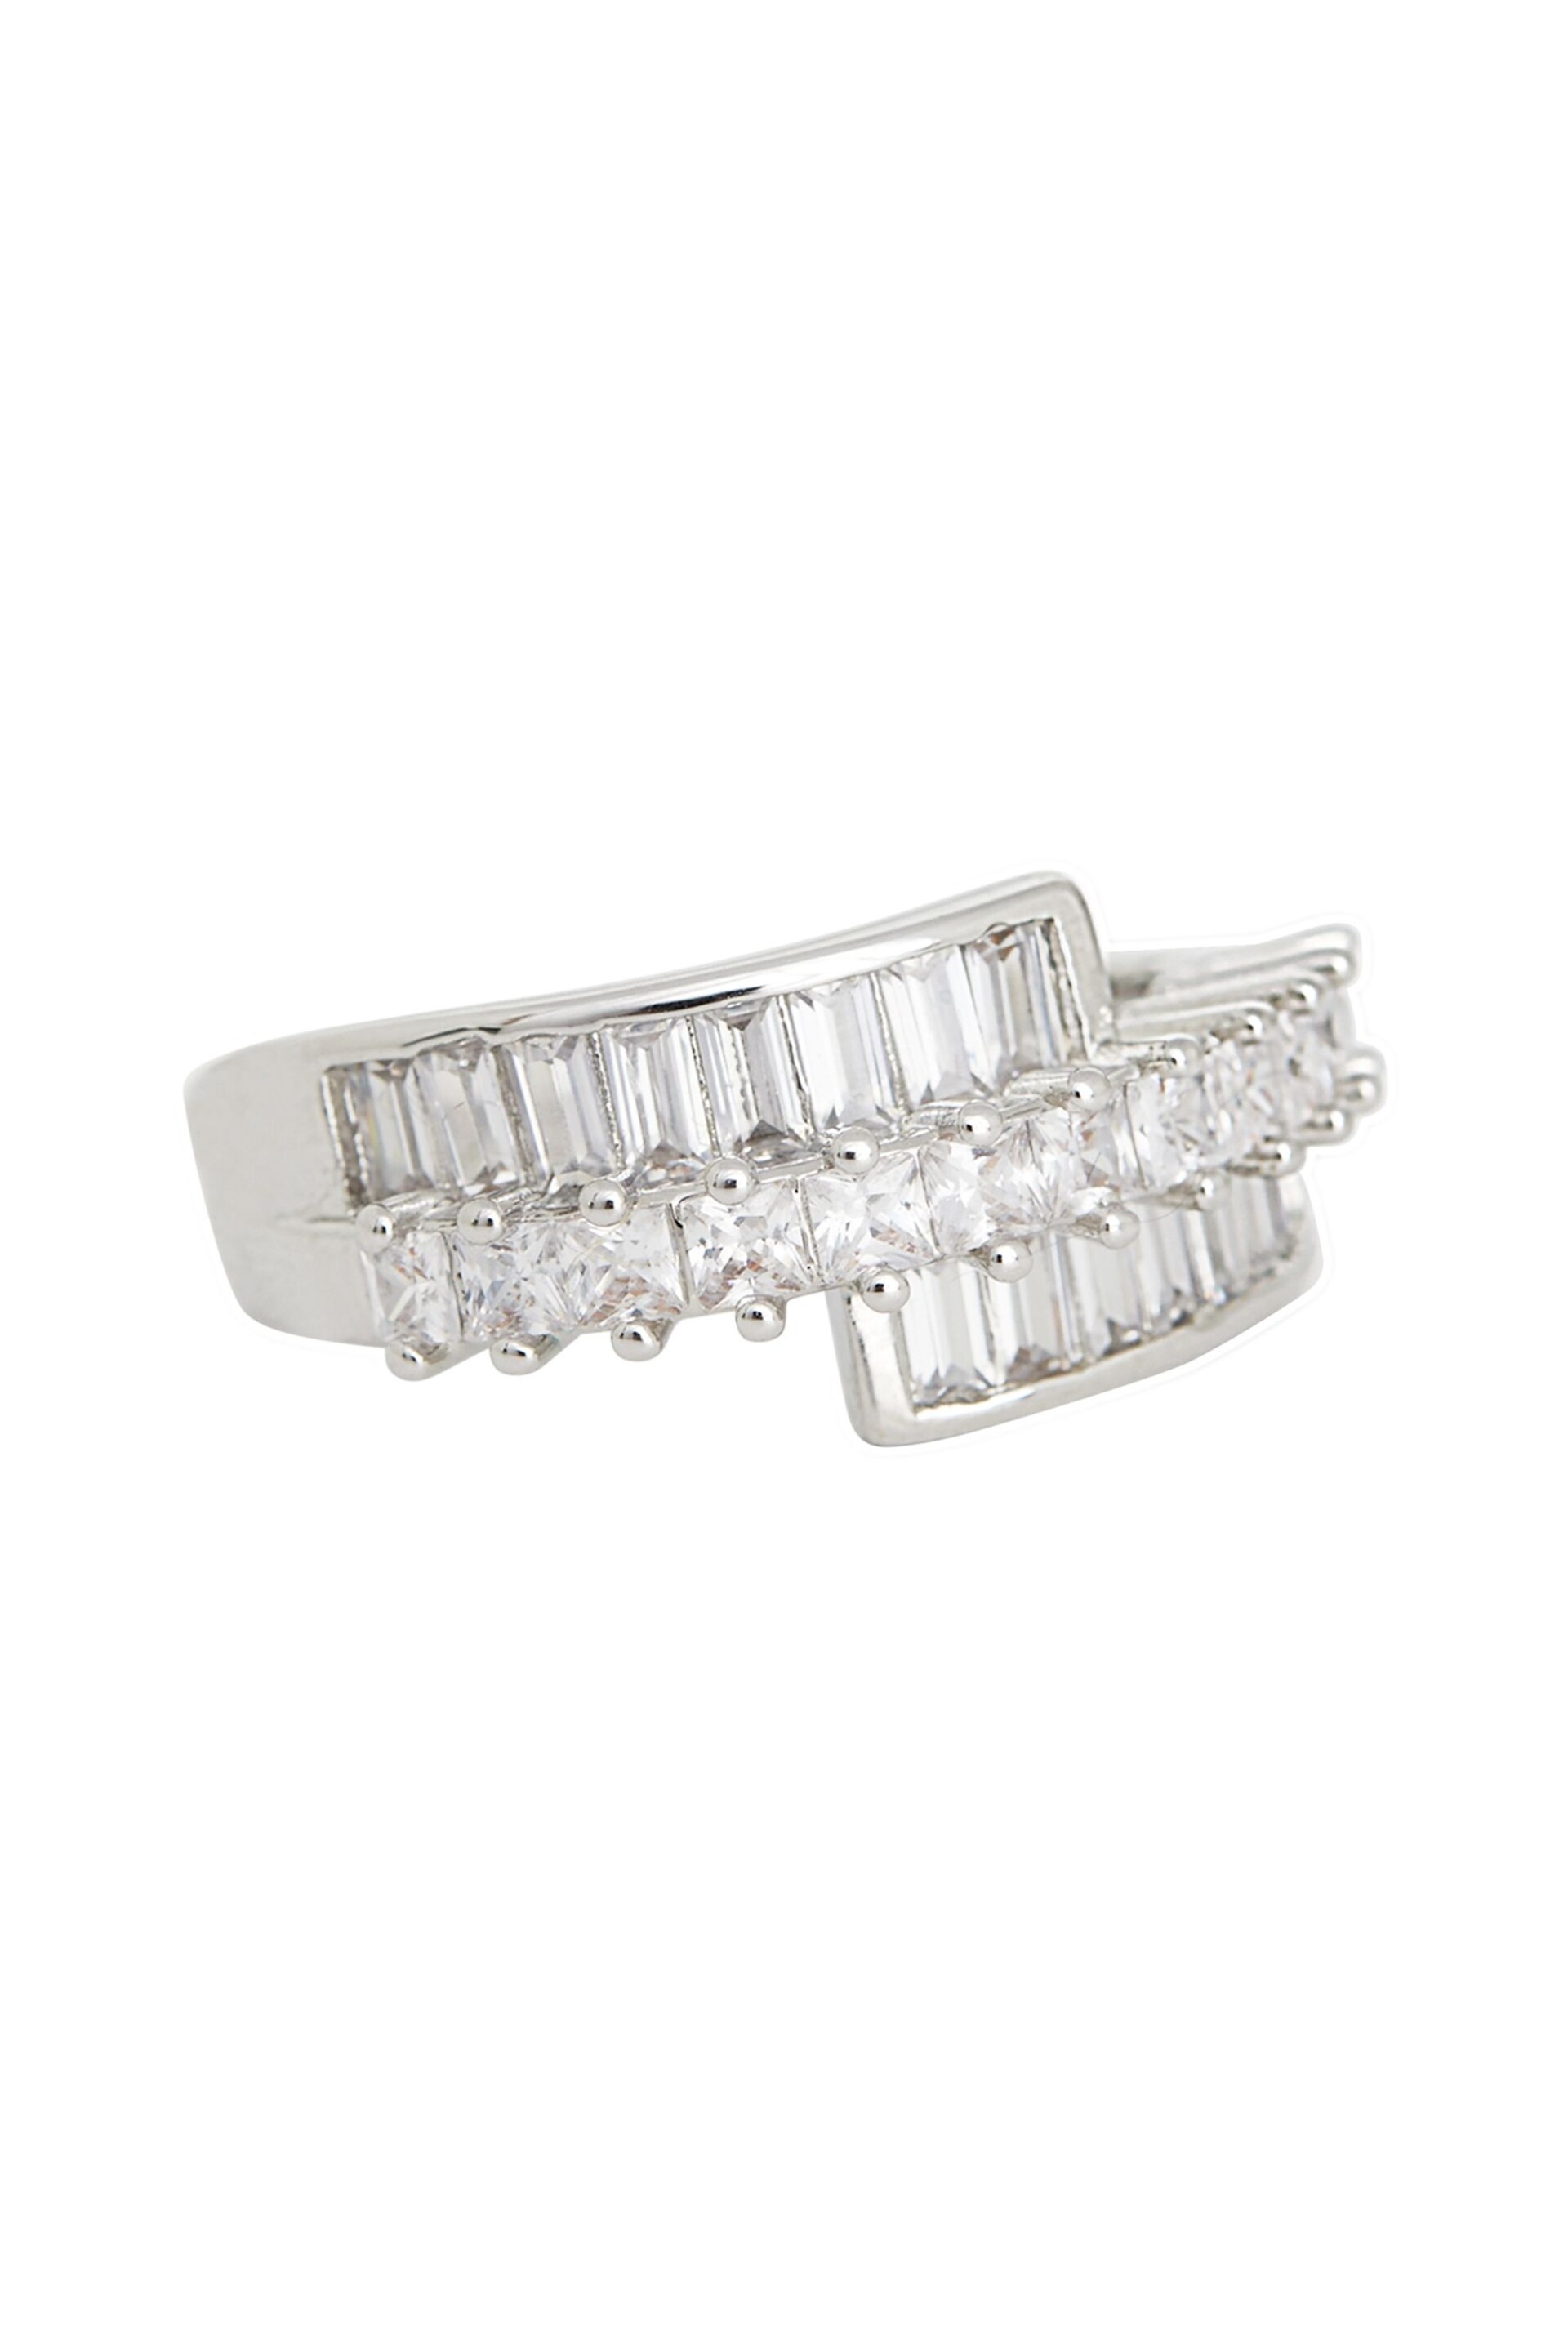 Jon Richard Silver Tone Rhodium Plated Cubic Zirconia Baguette And Pave Ring - Image 1 of 4